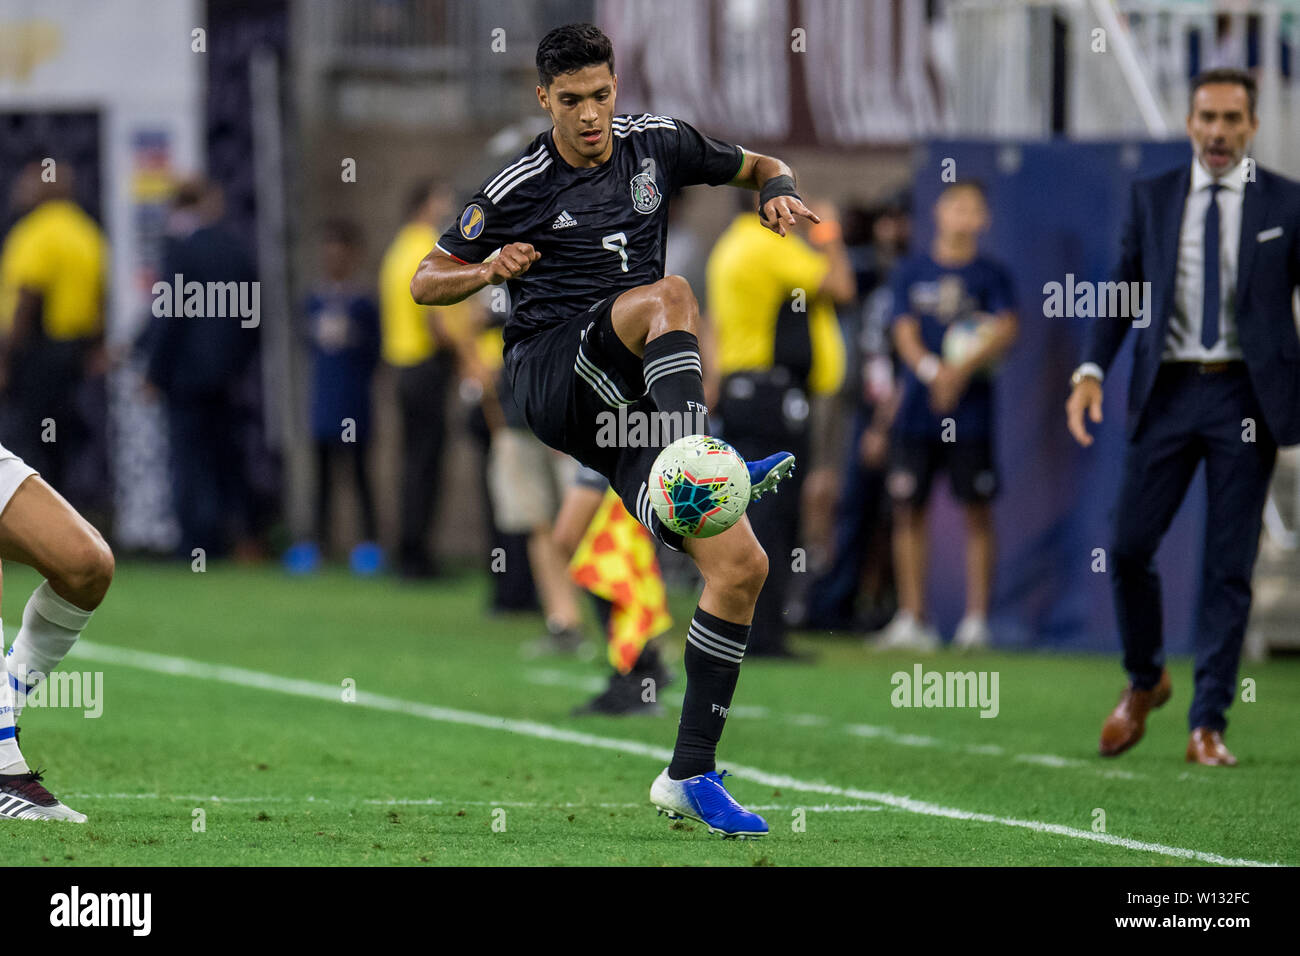 Houston, TX, USA. 29th June, 2019. Mexico forward Raul Jimenez (9) controls the ball during the 1st half of a CONCACAF Gold Cup quarterfinals soccer match between Costa Rica and Mexico at NRG Stadium in Houston, TX. Trask Smith/CSM/Alamy Live News Stock Photo